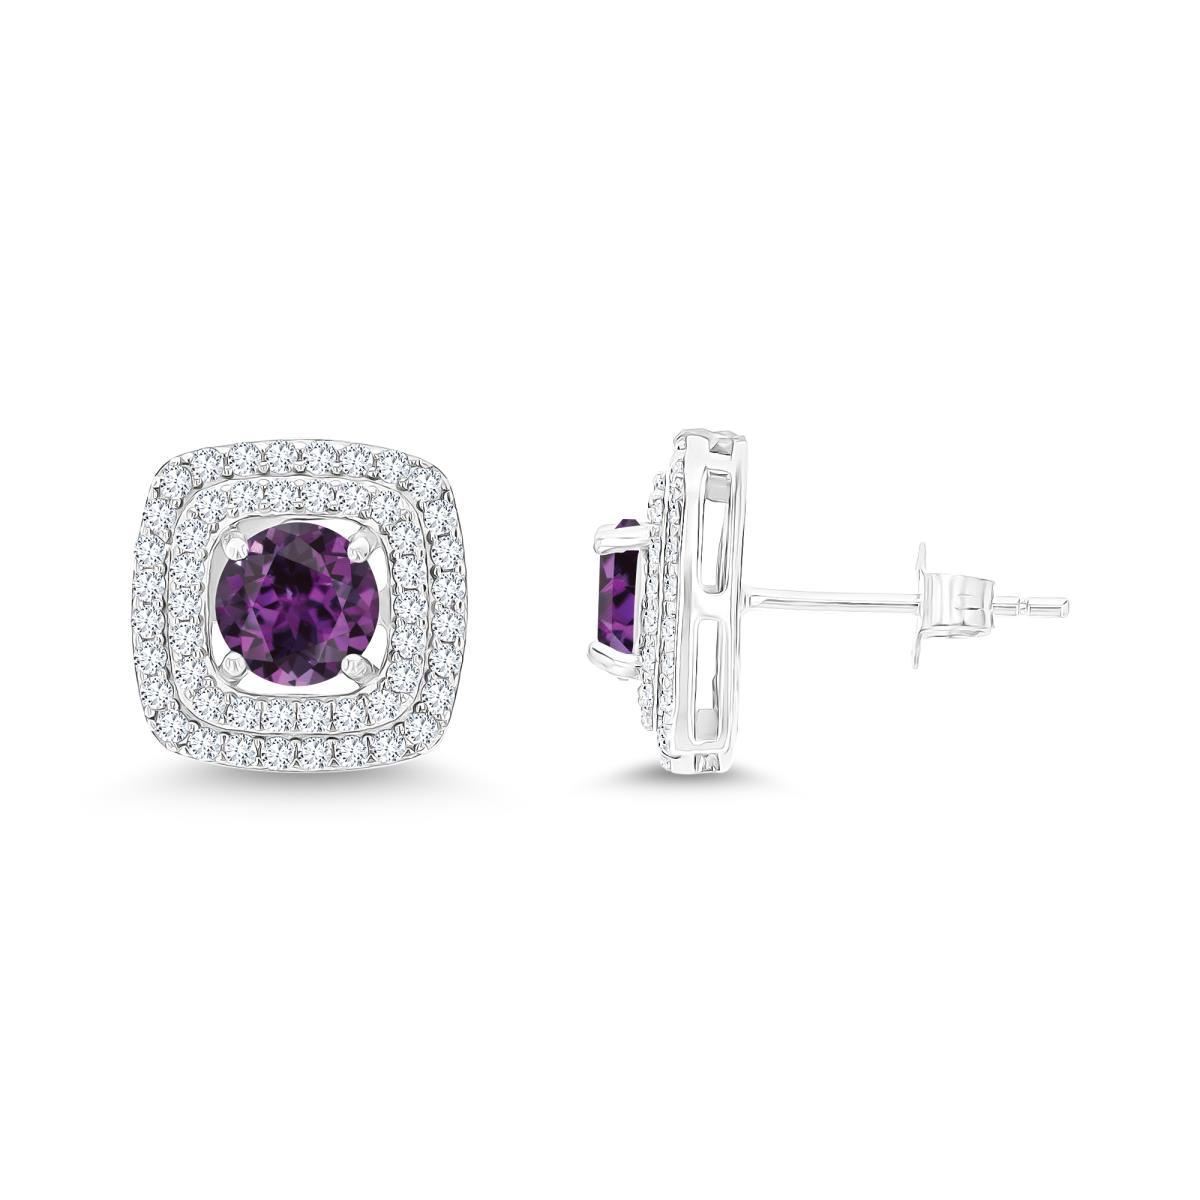 Sterling Silver Rhodium 6mm RD Cr Alexandrite/ Cr White Sapphire Cushion Double Halo Stud Earring